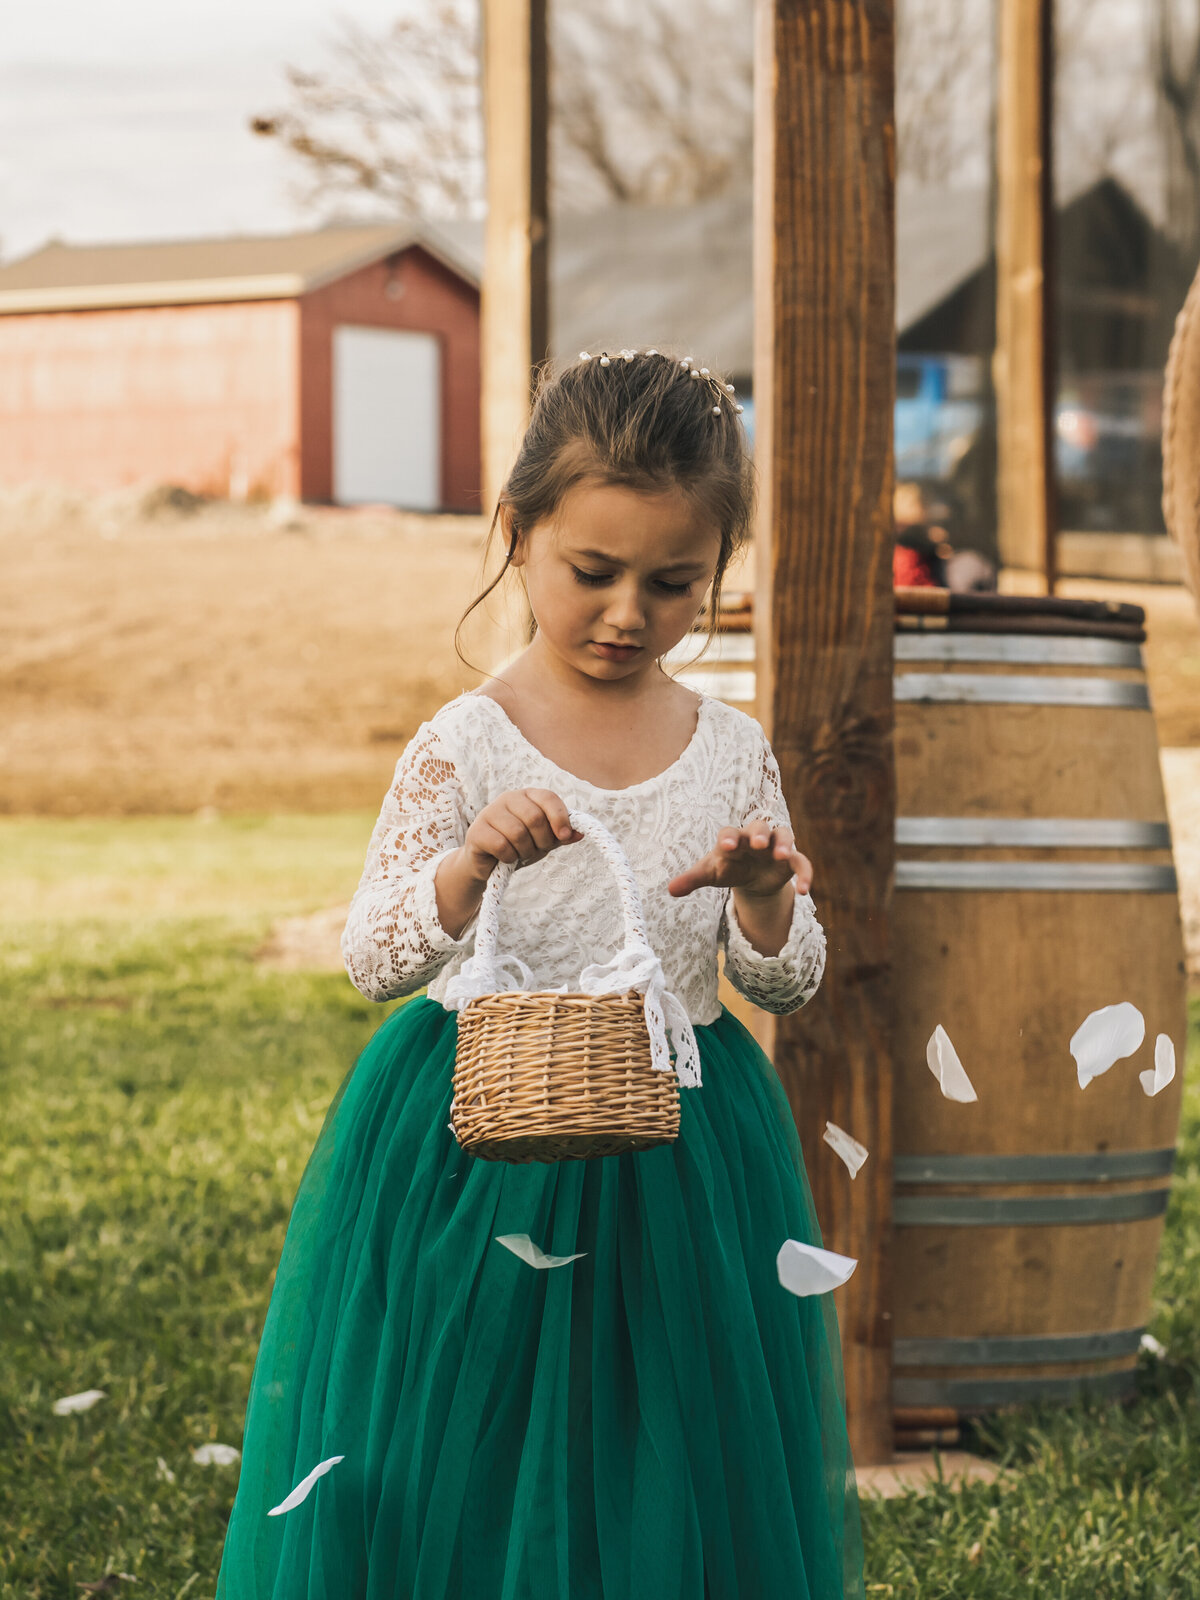 Flower girl captured by 4Karma Studio during a rustic wedding in Sonoma